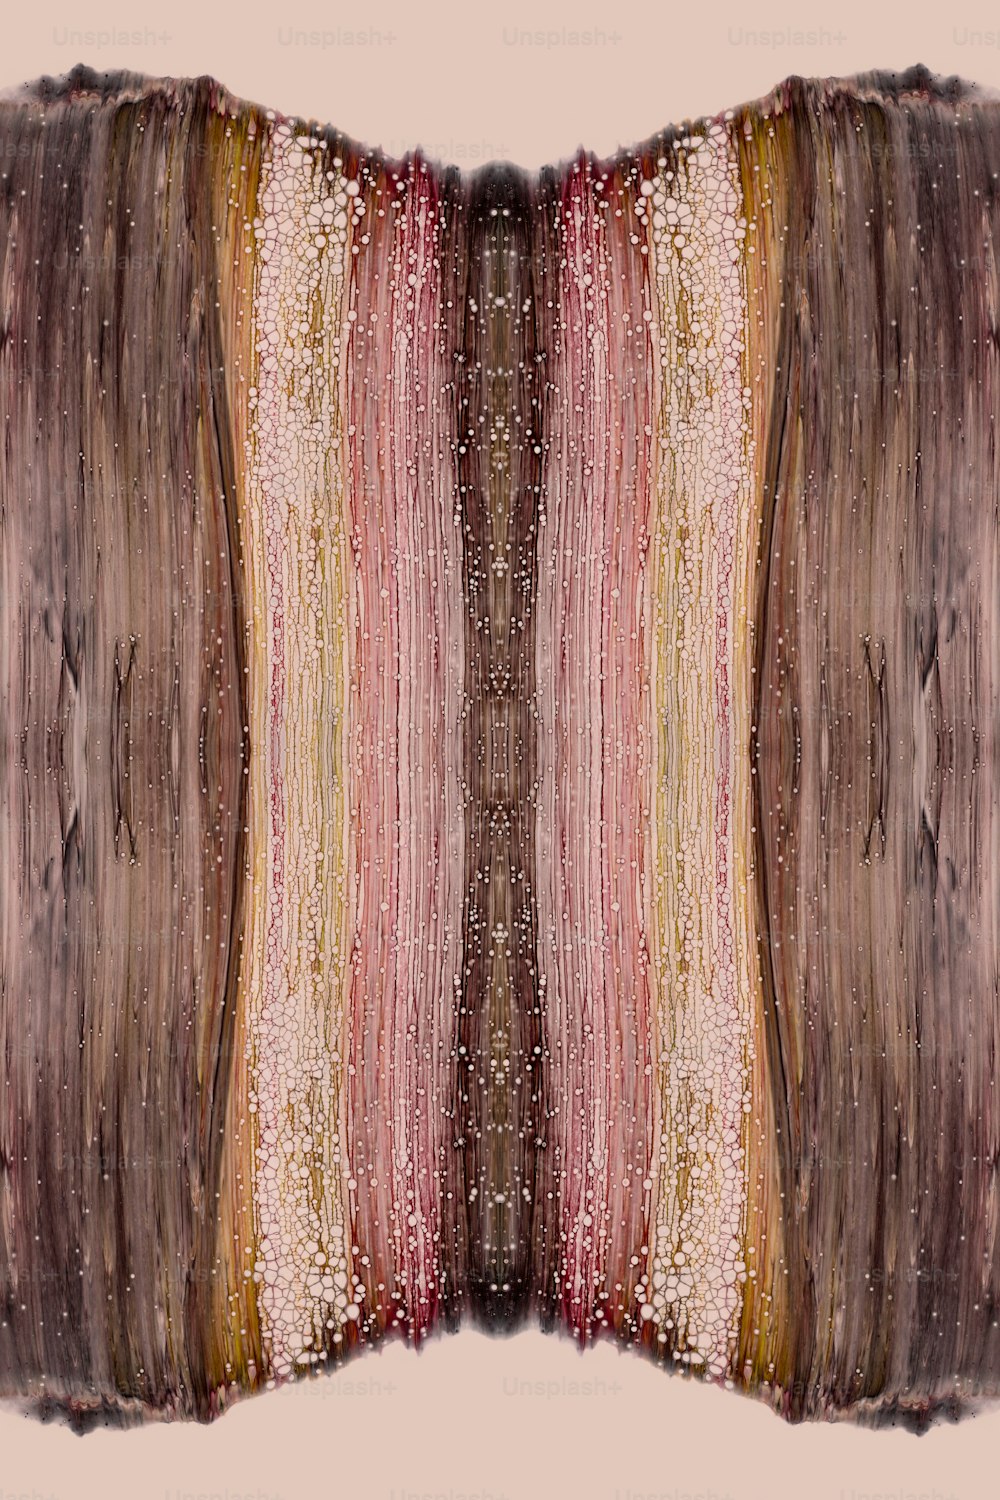 an abstract image of a wooden surface with a pink background